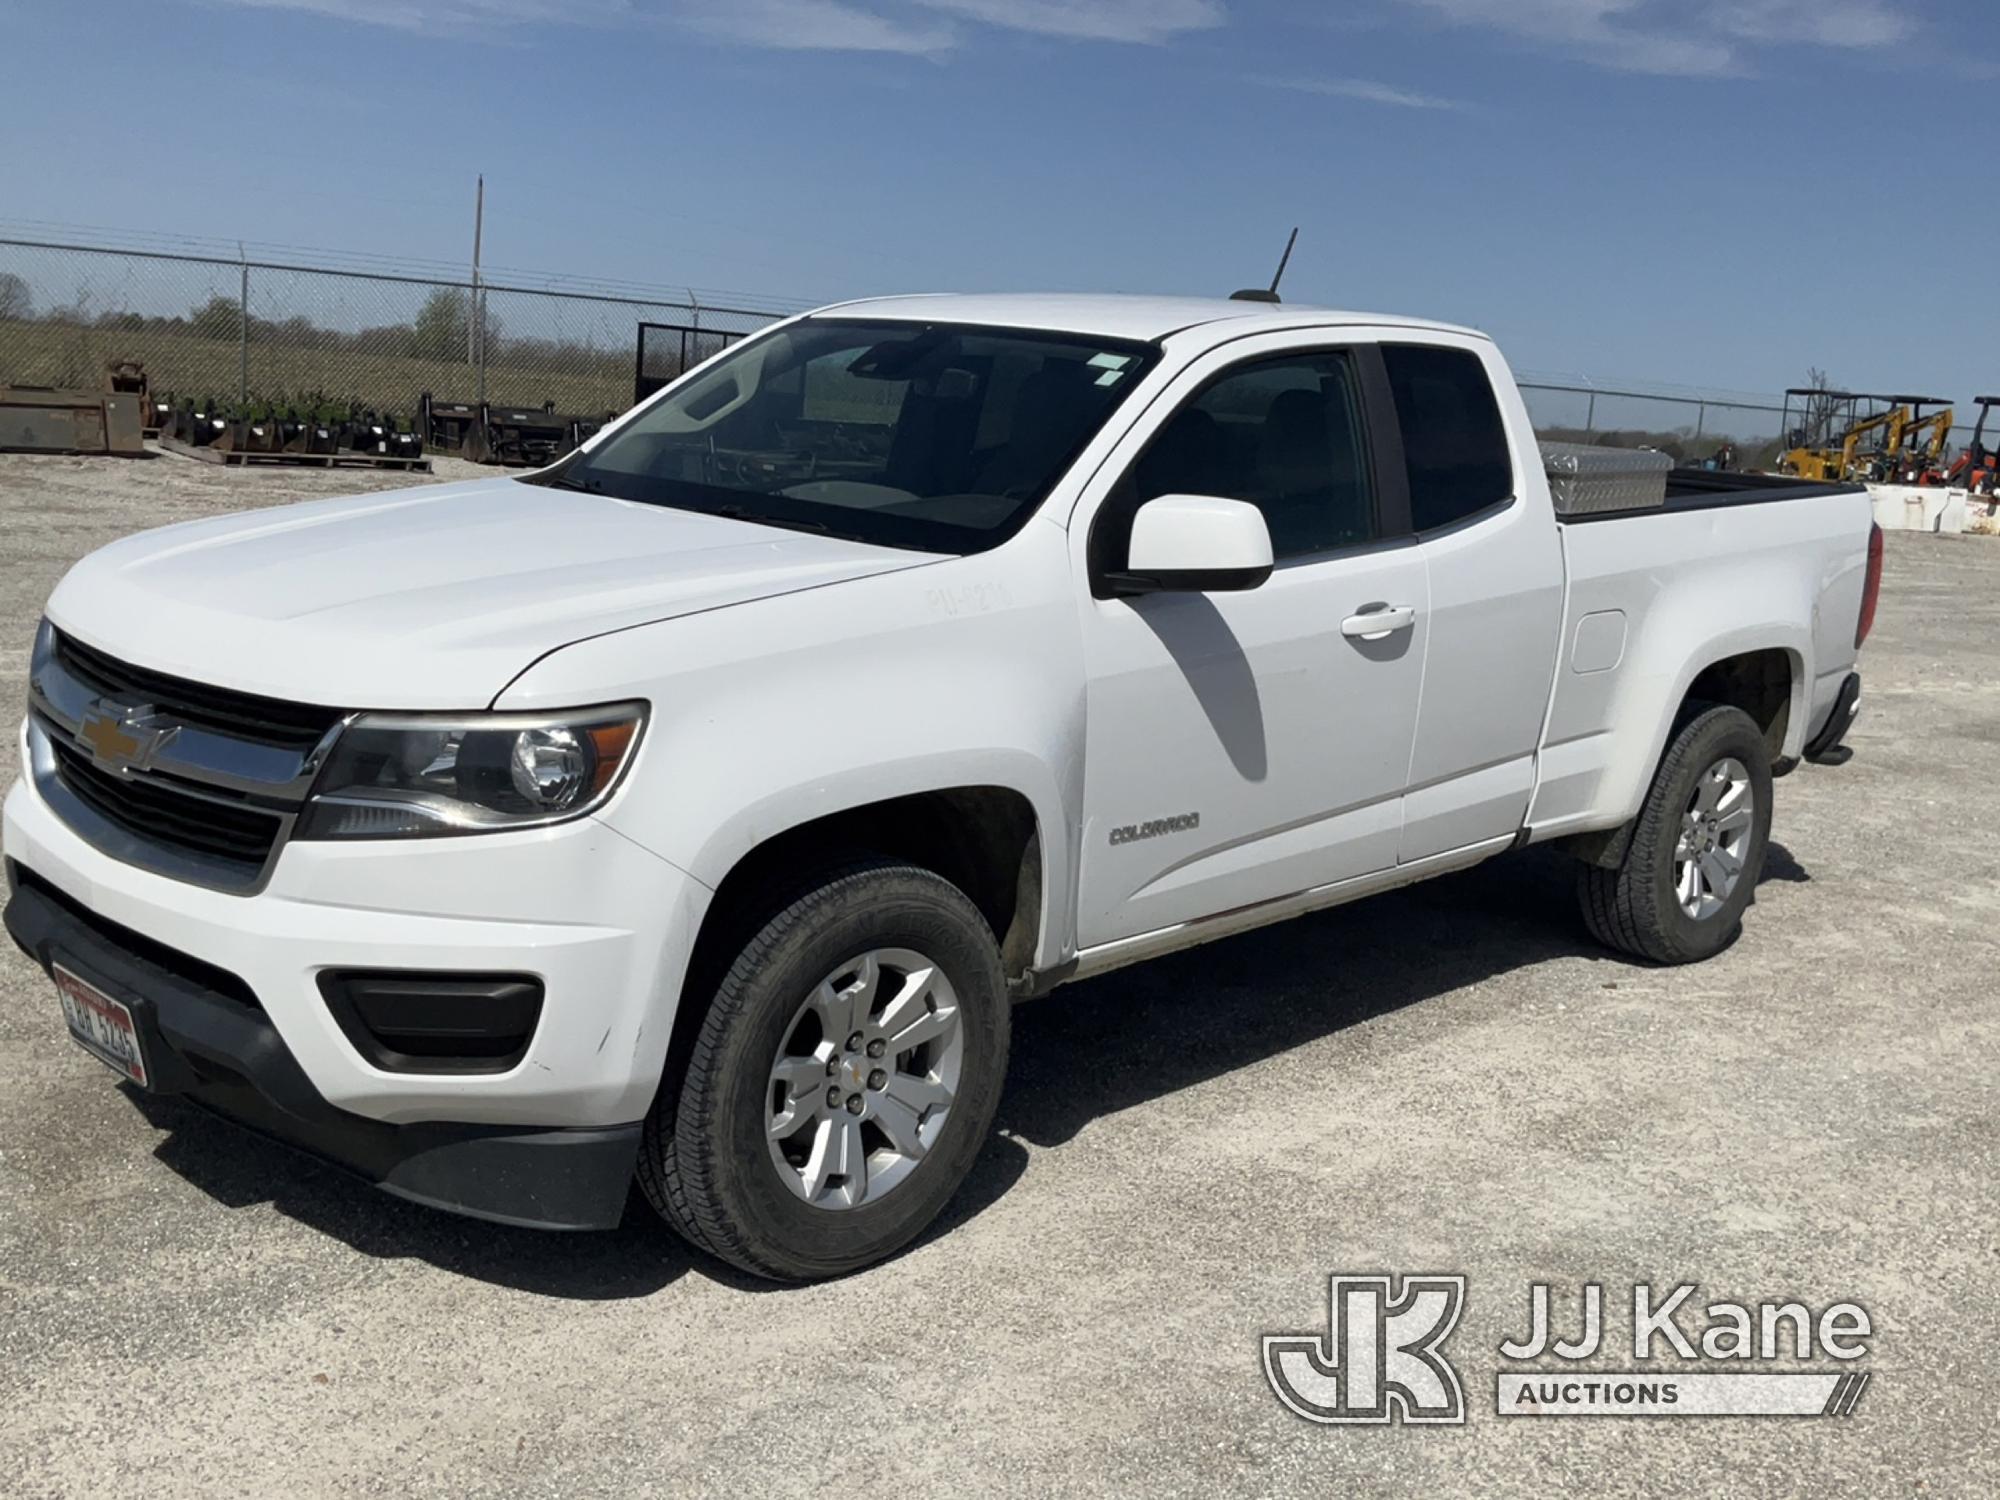 (Hawk Point, MO) 2017 Chevrolet Colorado Extended-Cab Pickup Truck Runs & Moves) (Jump To Start